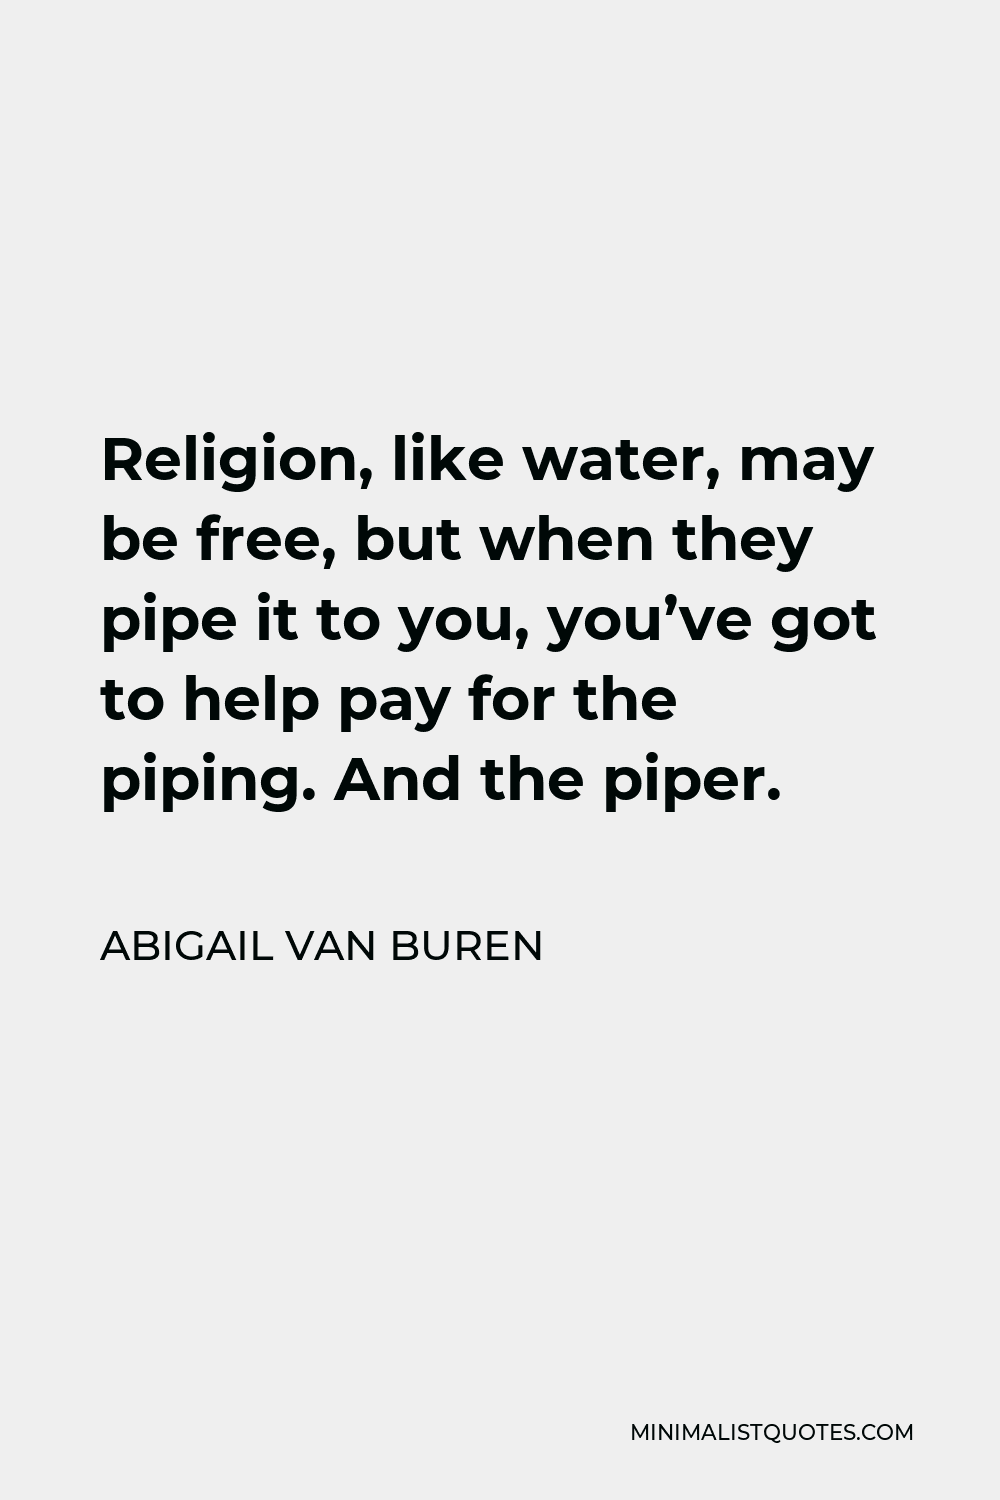 Abigail Van Buren Quote - Religion, like water, may be free, but when they pipe it to you, you’ve got to help pay for the piping. And the piper.